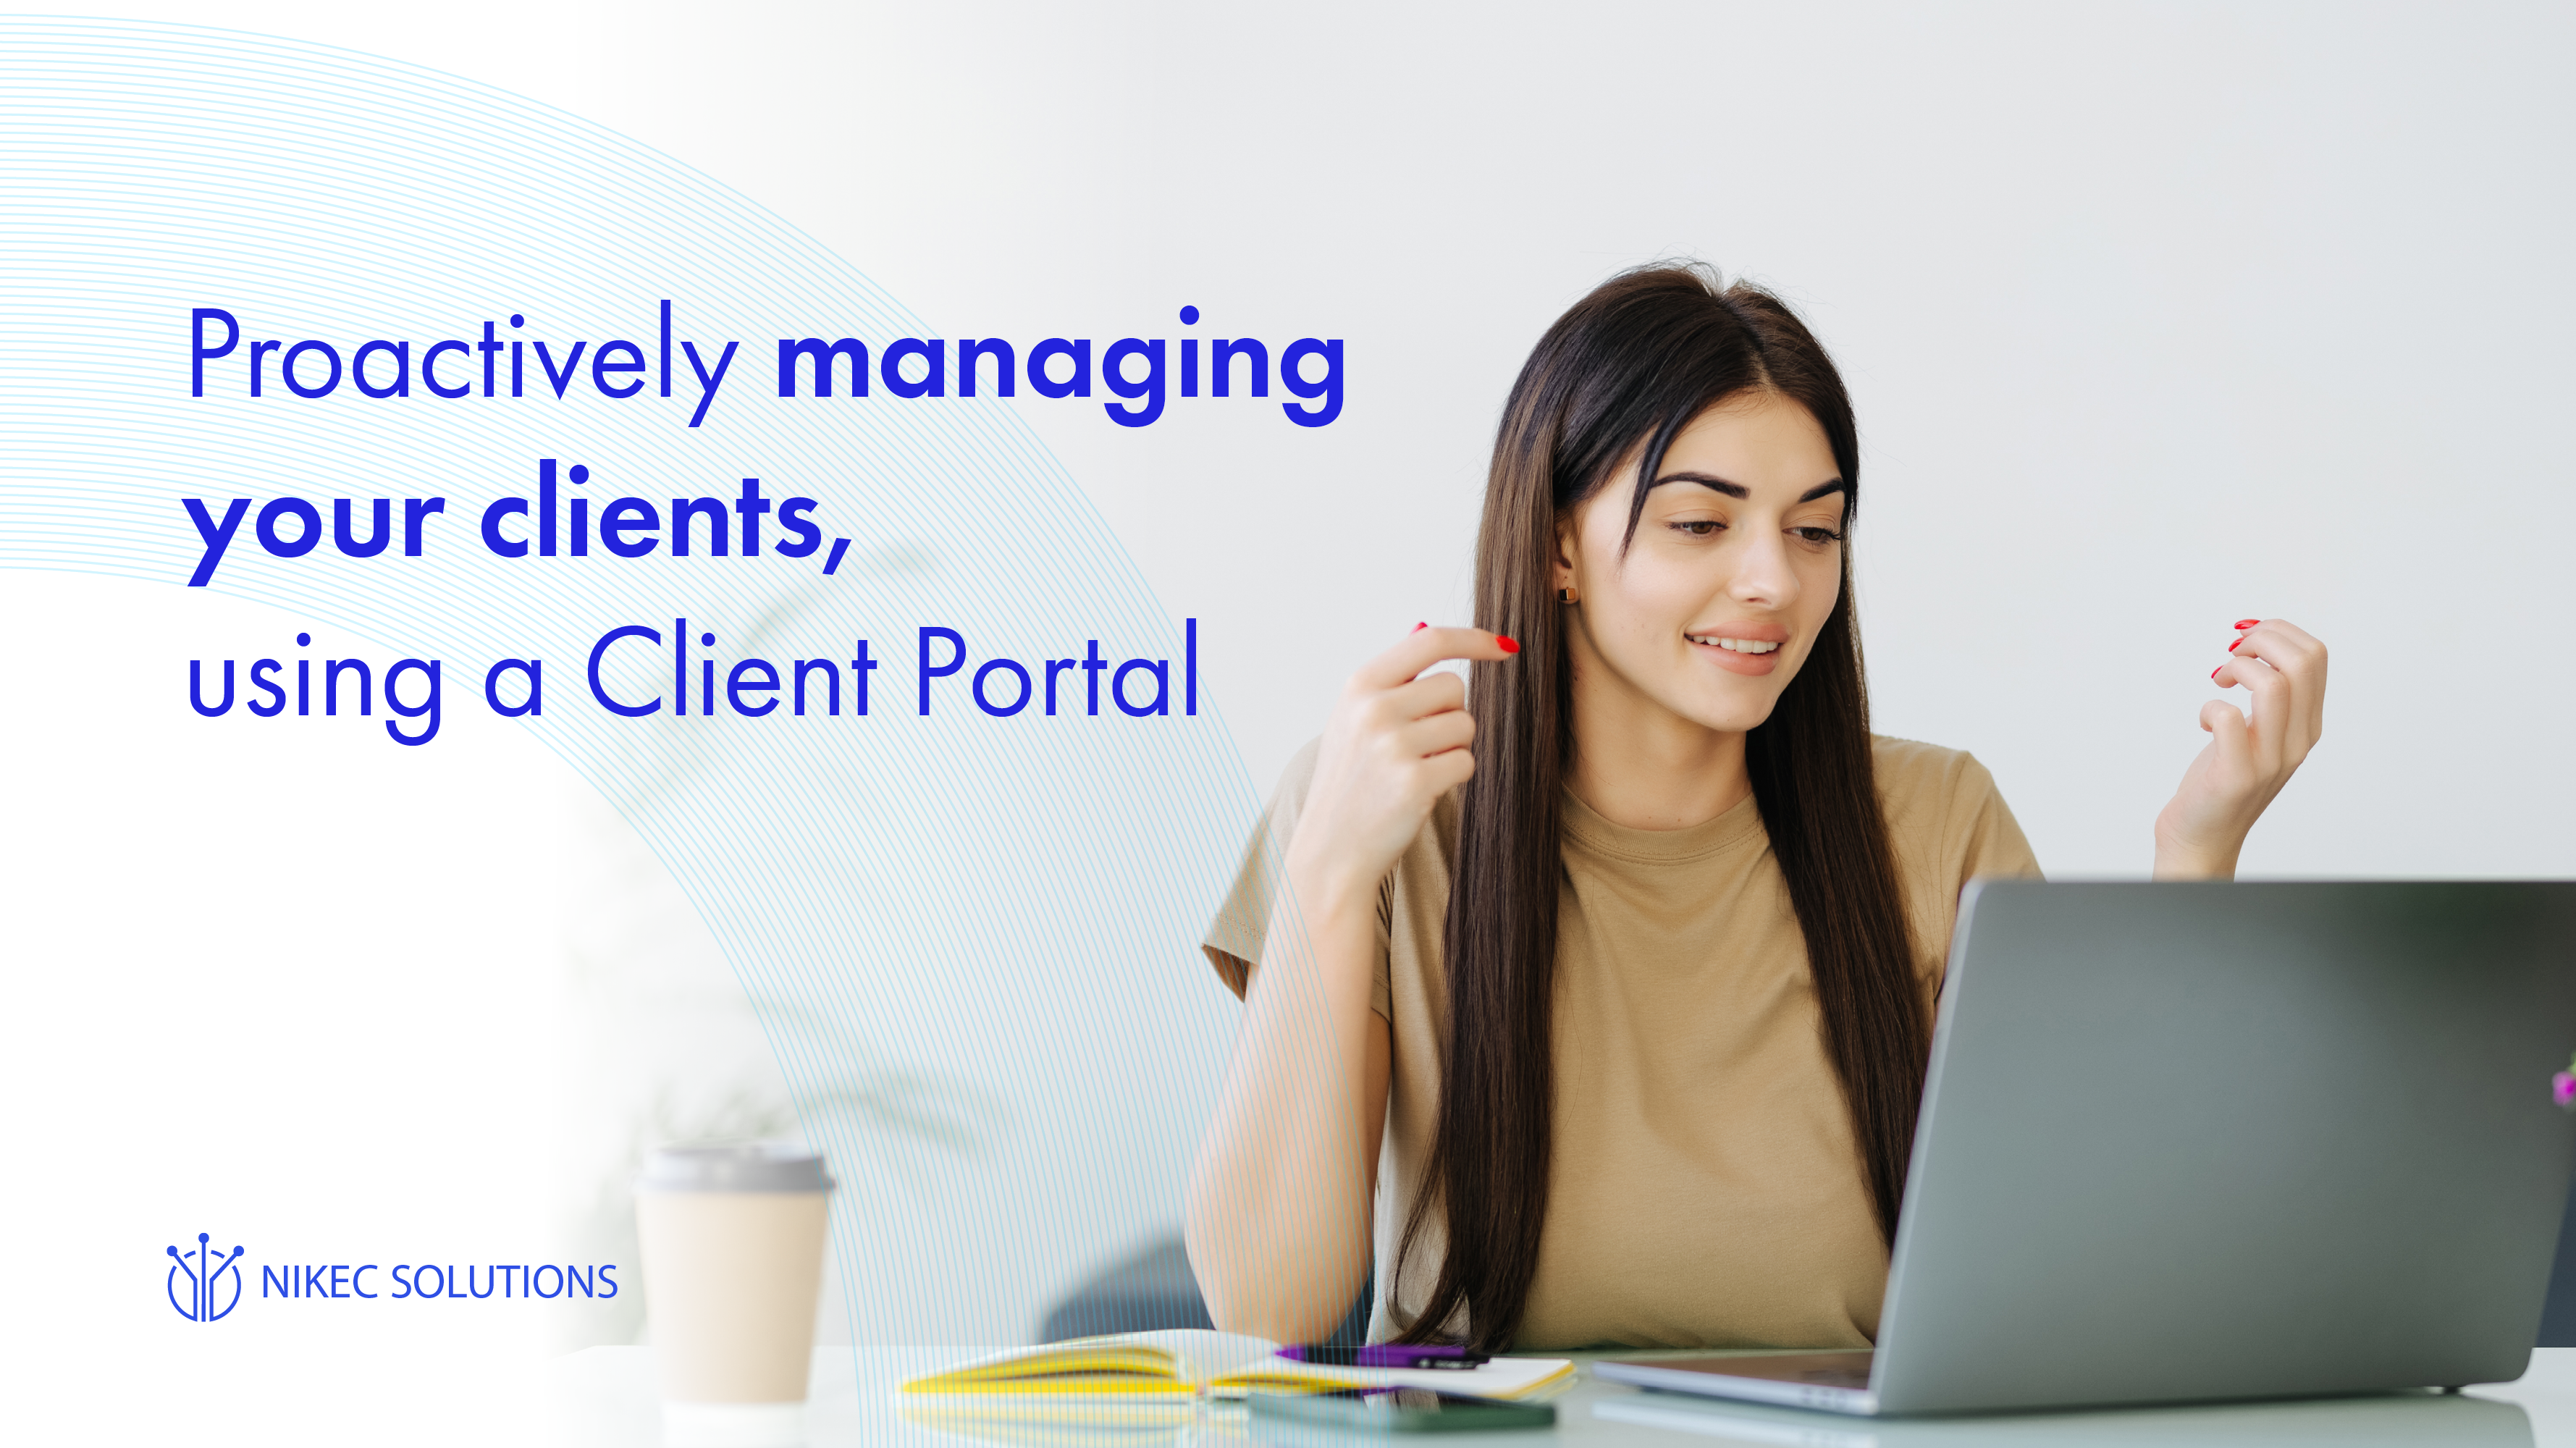 Proactively managing your clients